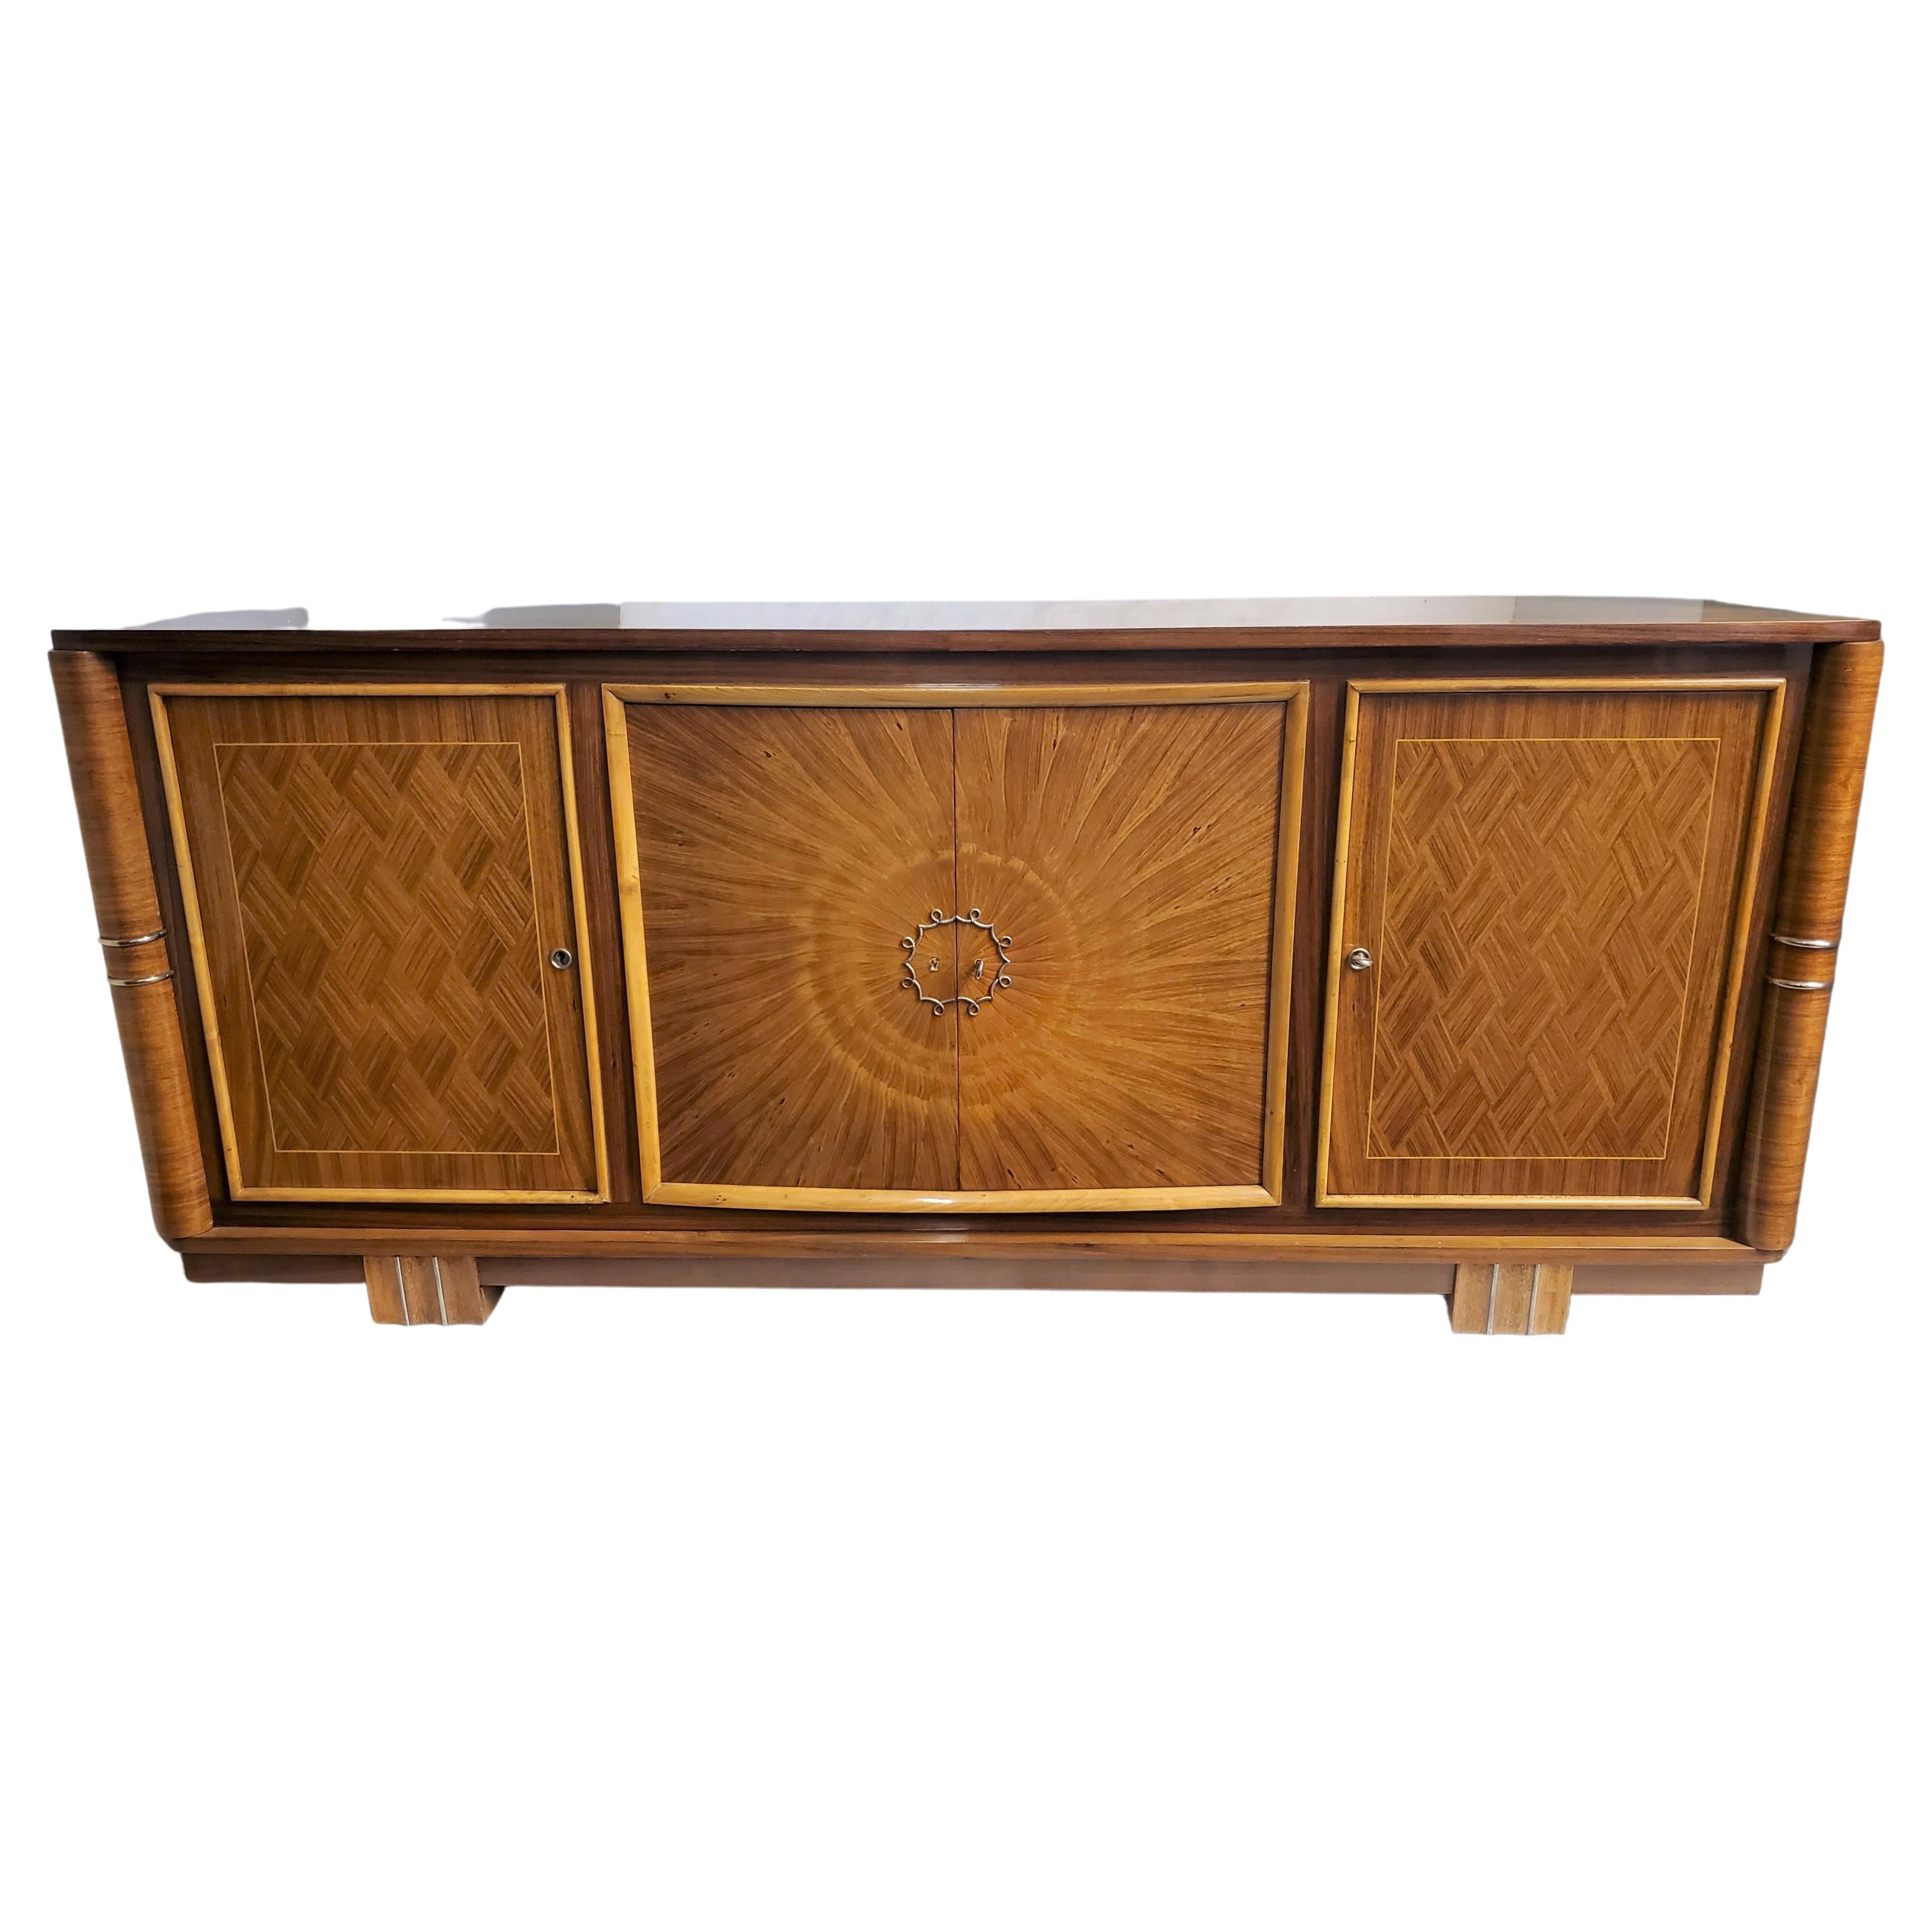 Inlay Fine French Parquetry and Marquetry Inlaid Sunburst Cabinet Att to Lucien Rollin For Sale